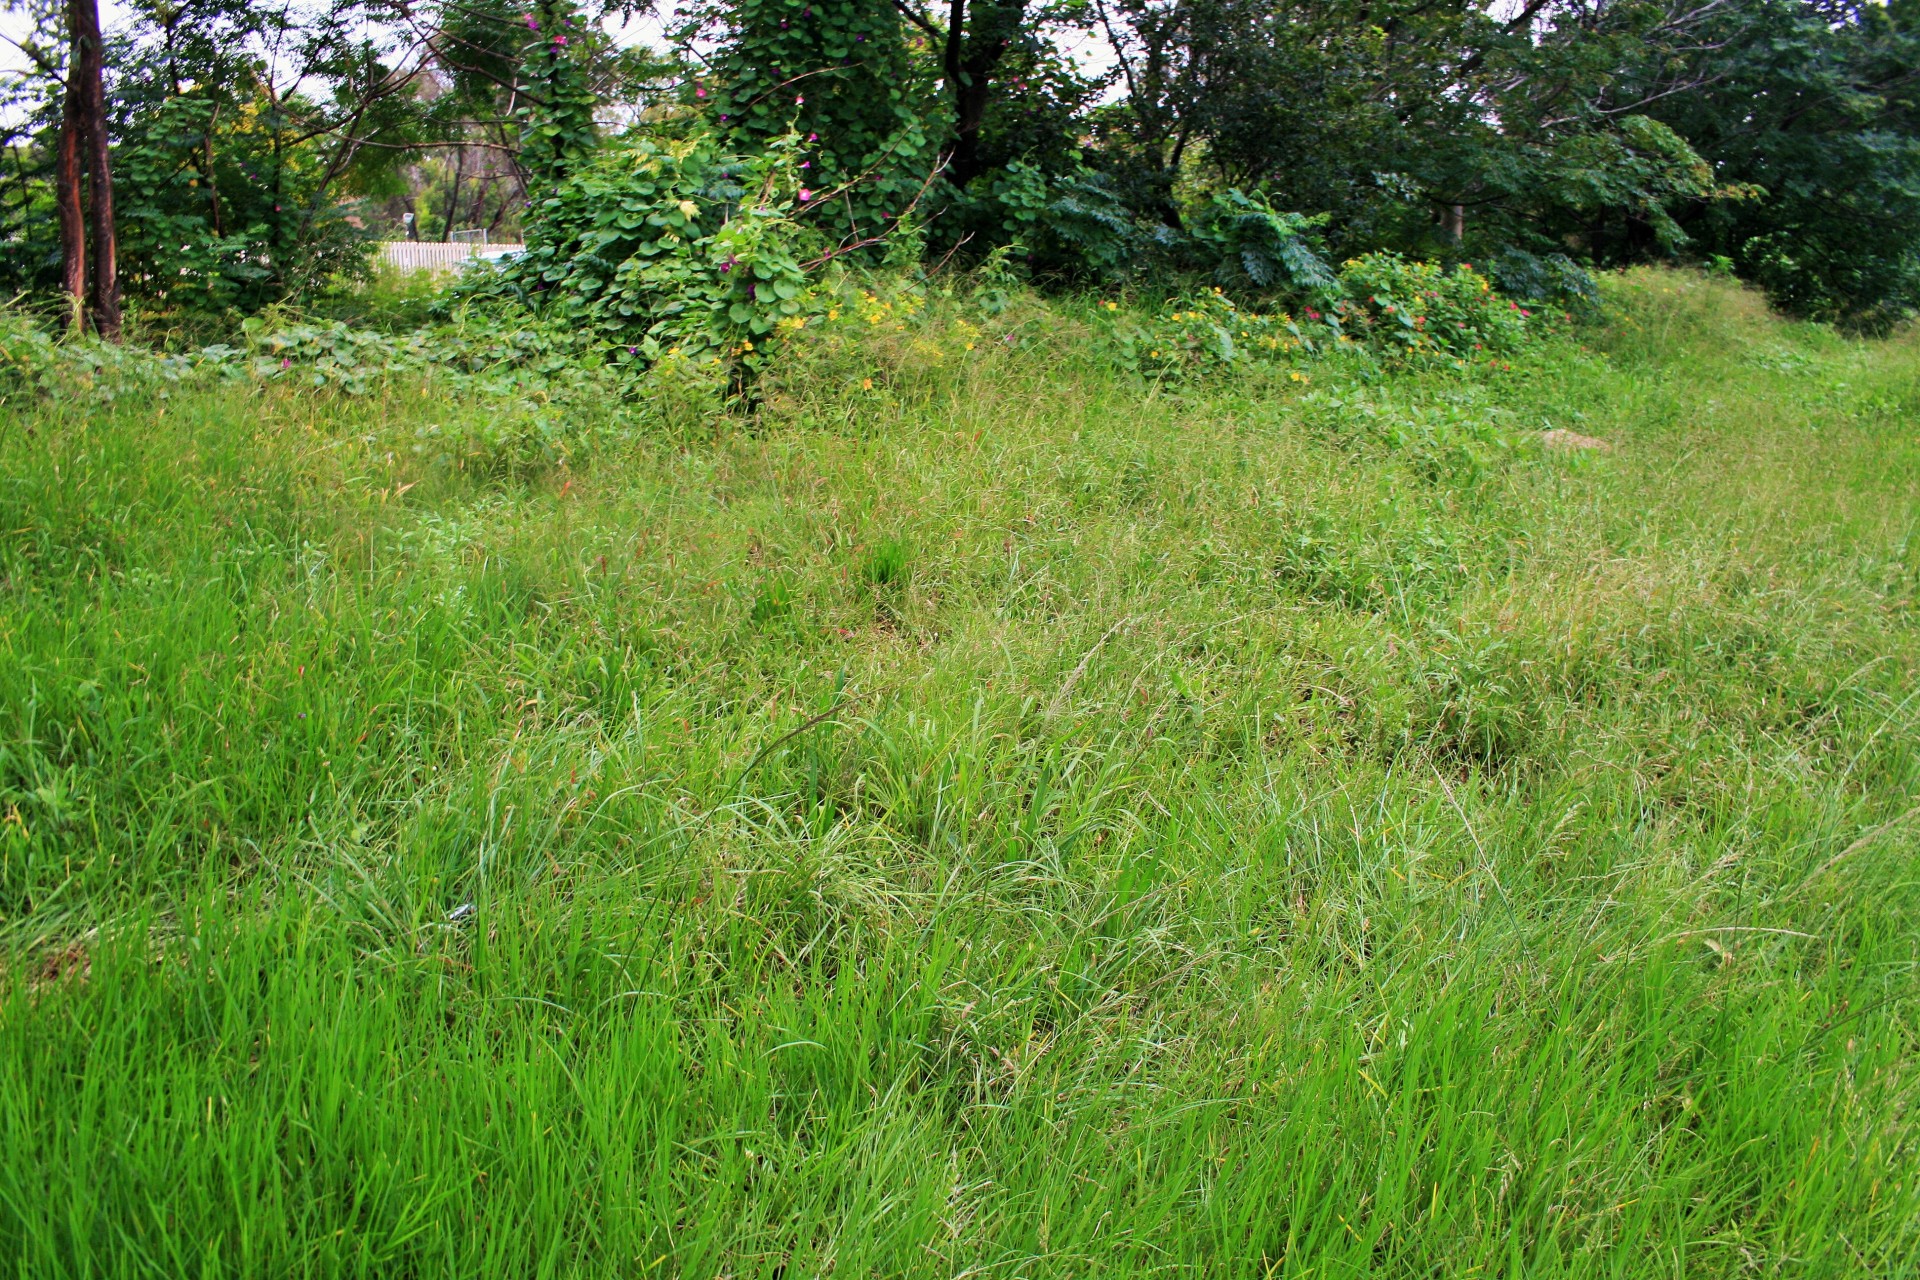 thriving grass and weeds